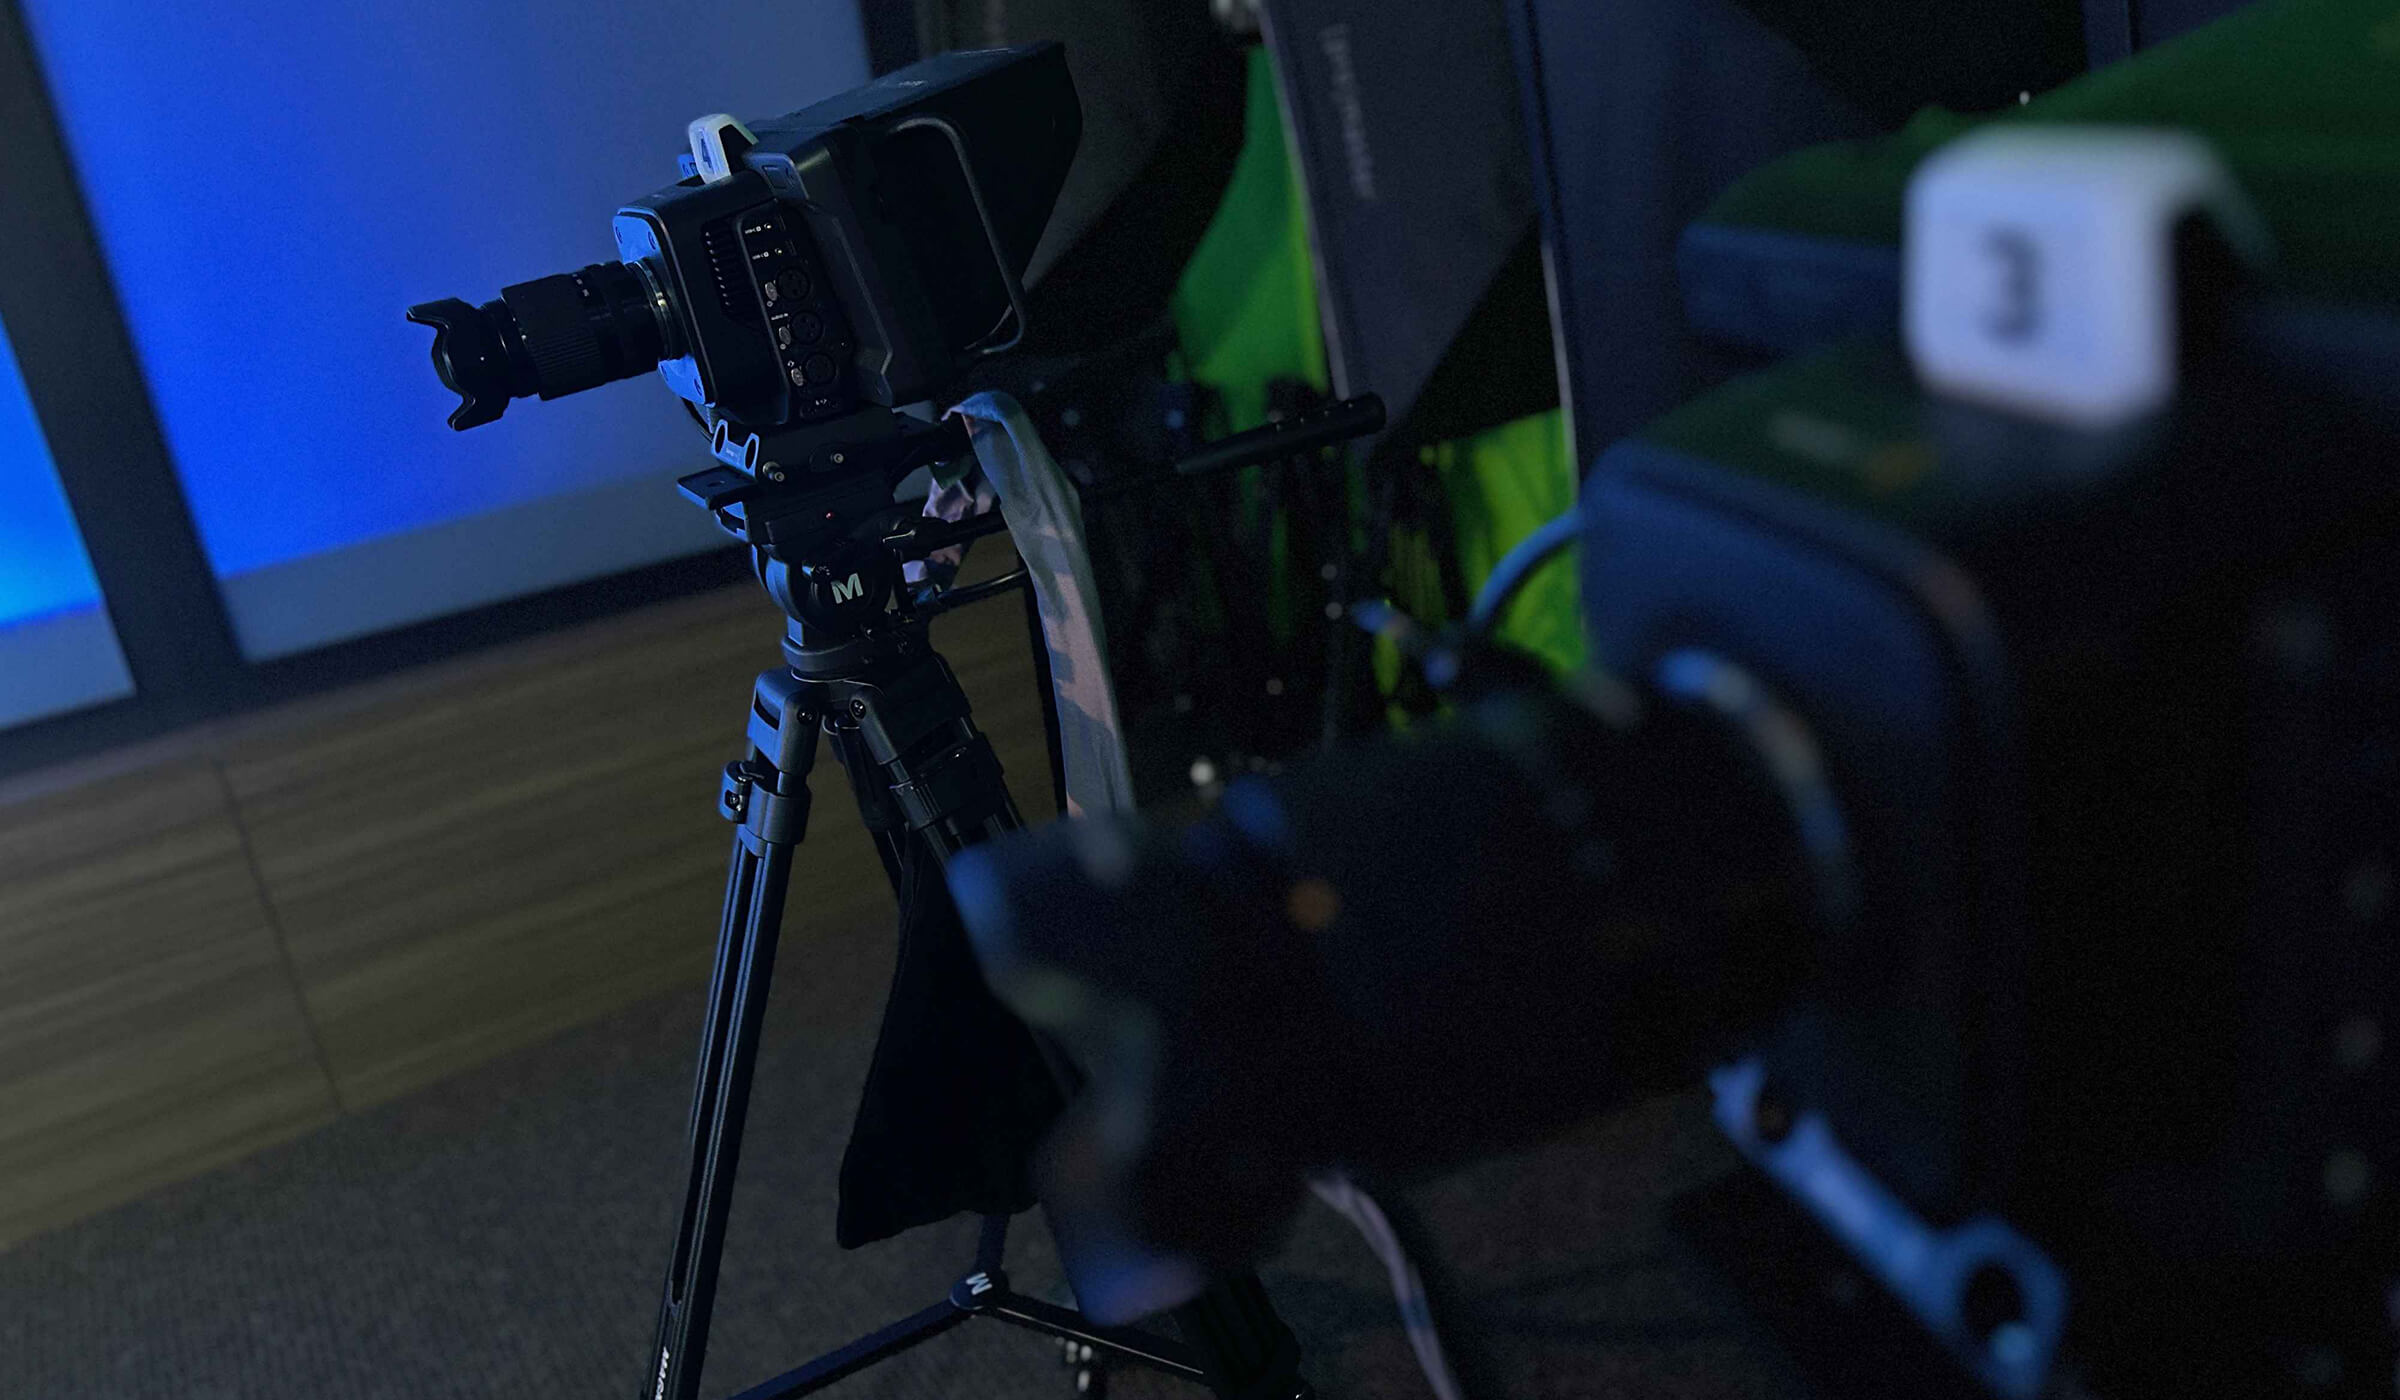 Start your video podcast in Two Brothers full video production studio.